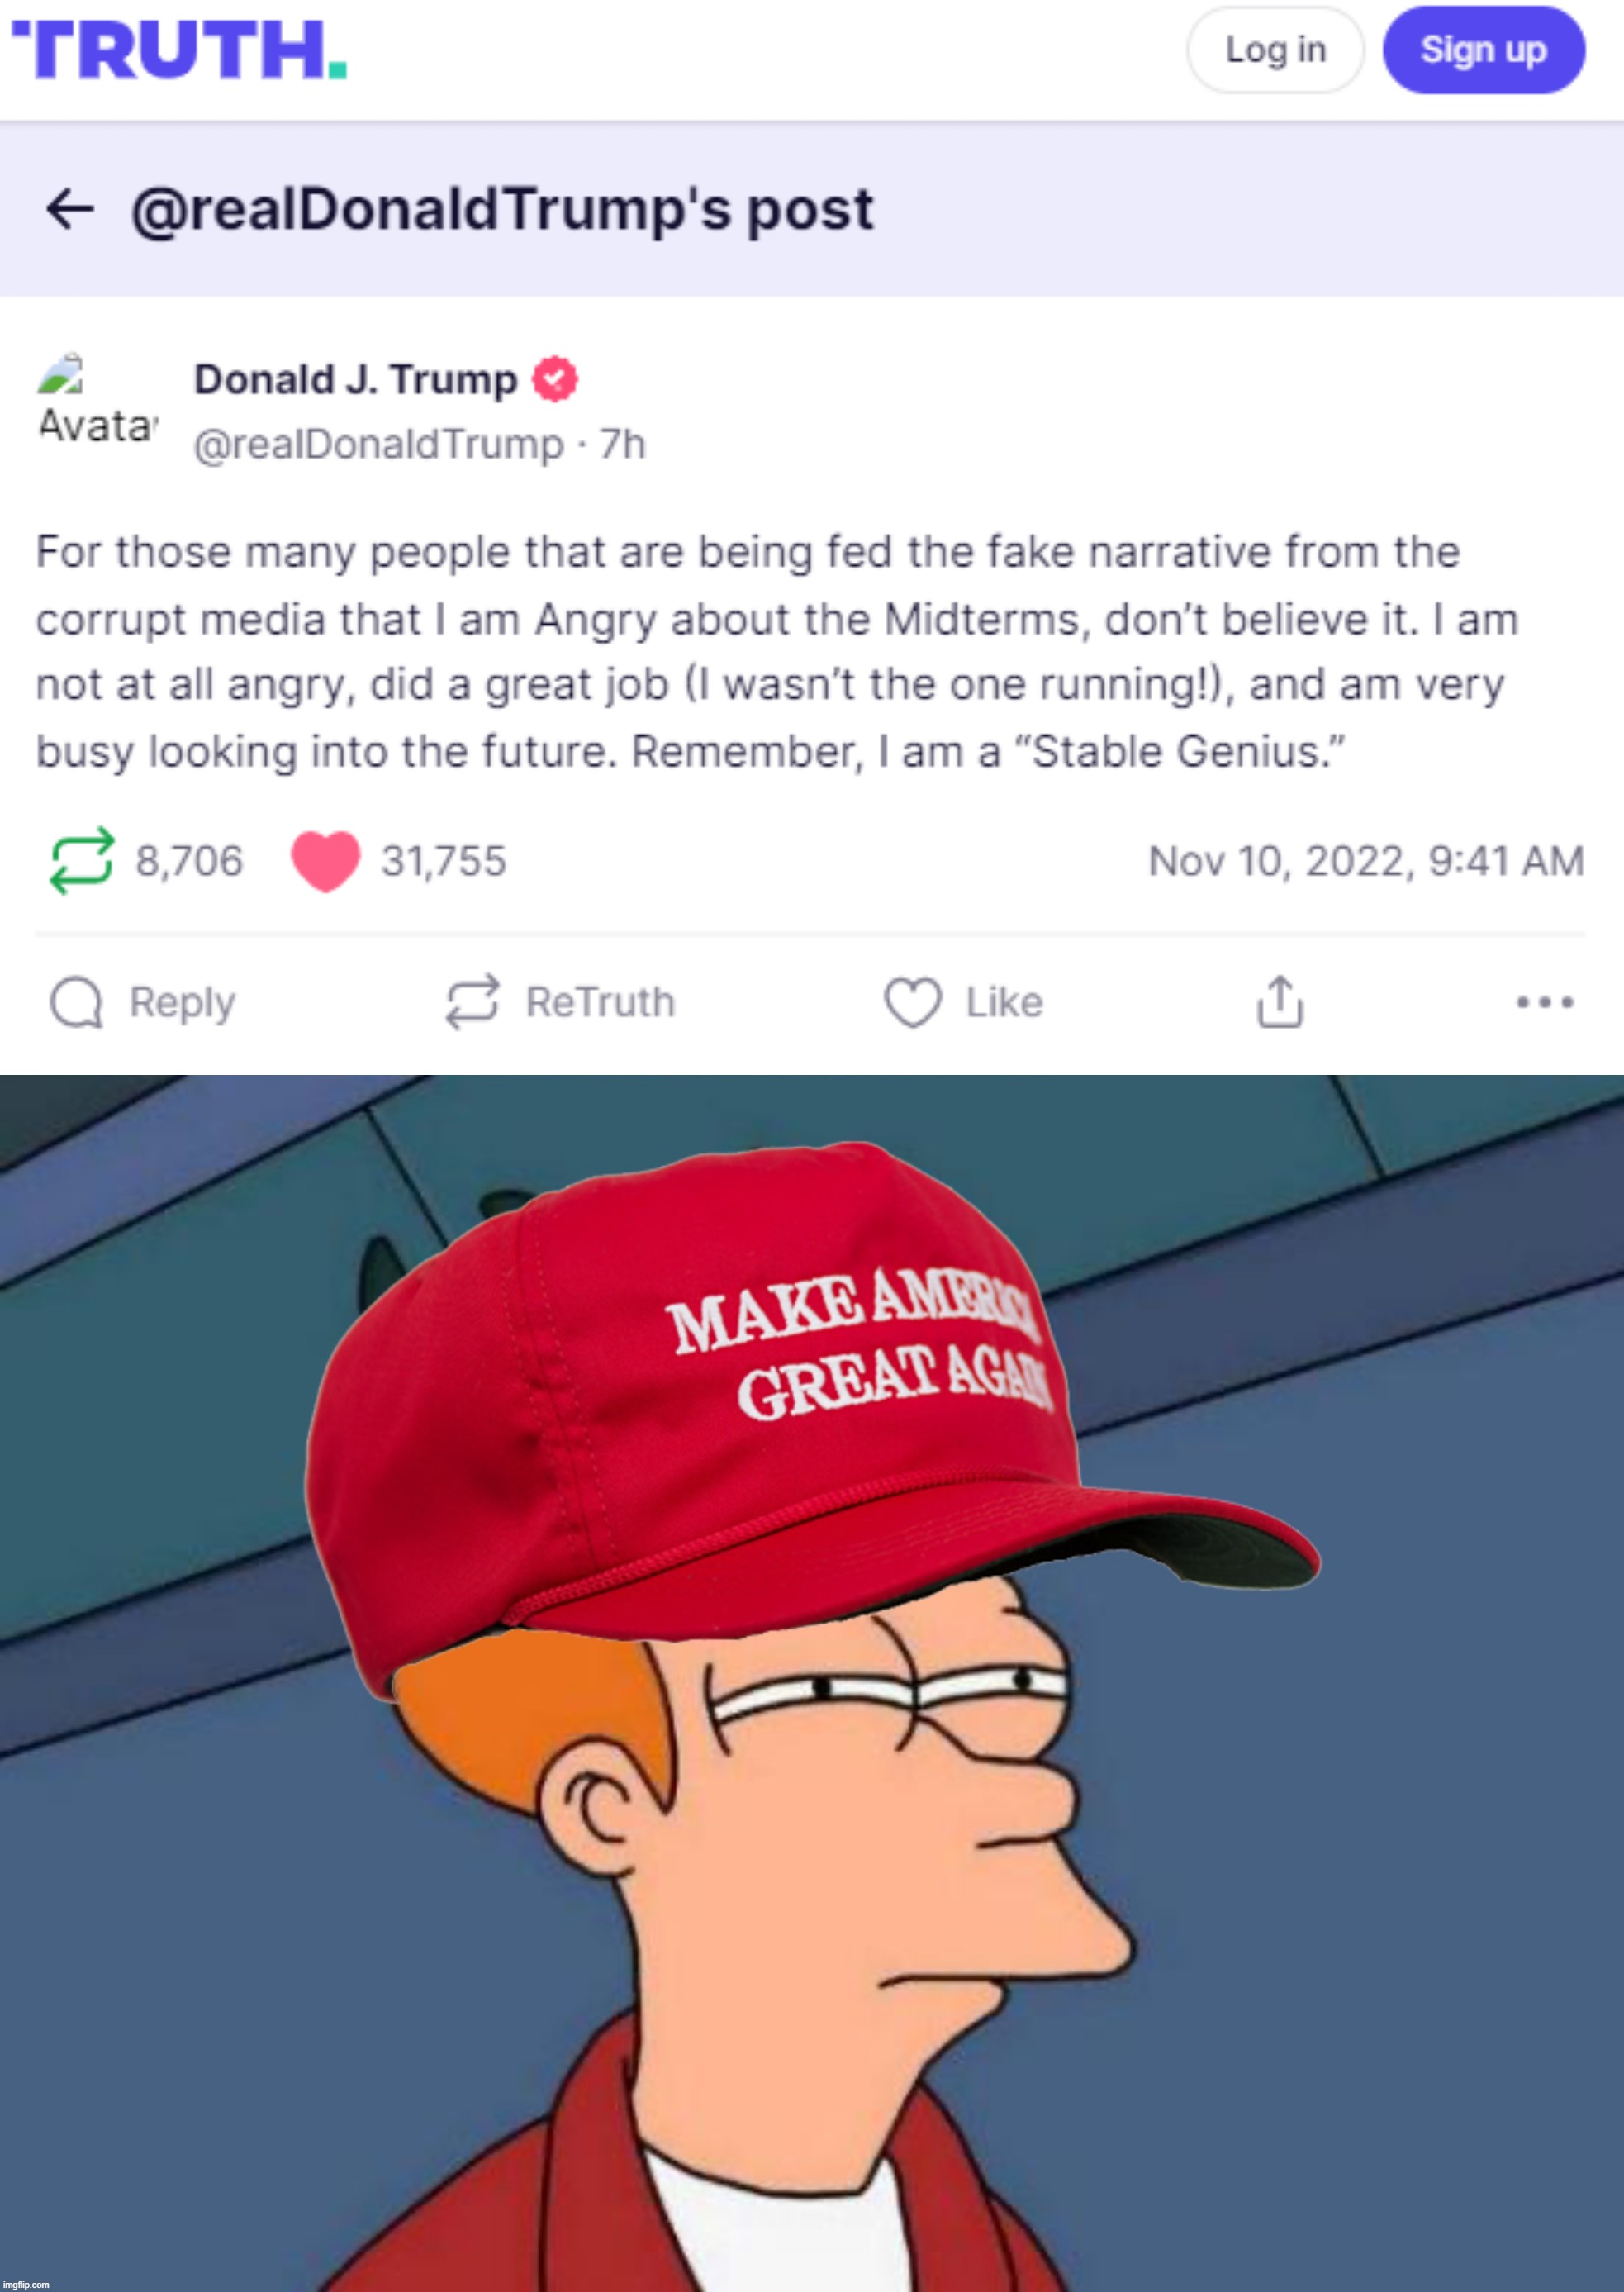 Not sure whether to believe the fake news media this time | image tagged in maga futurama fry,midterms,donald trump,stable genius,fake news media narratives,out-of-place futurama fry | made w/ Imgflip meme maker